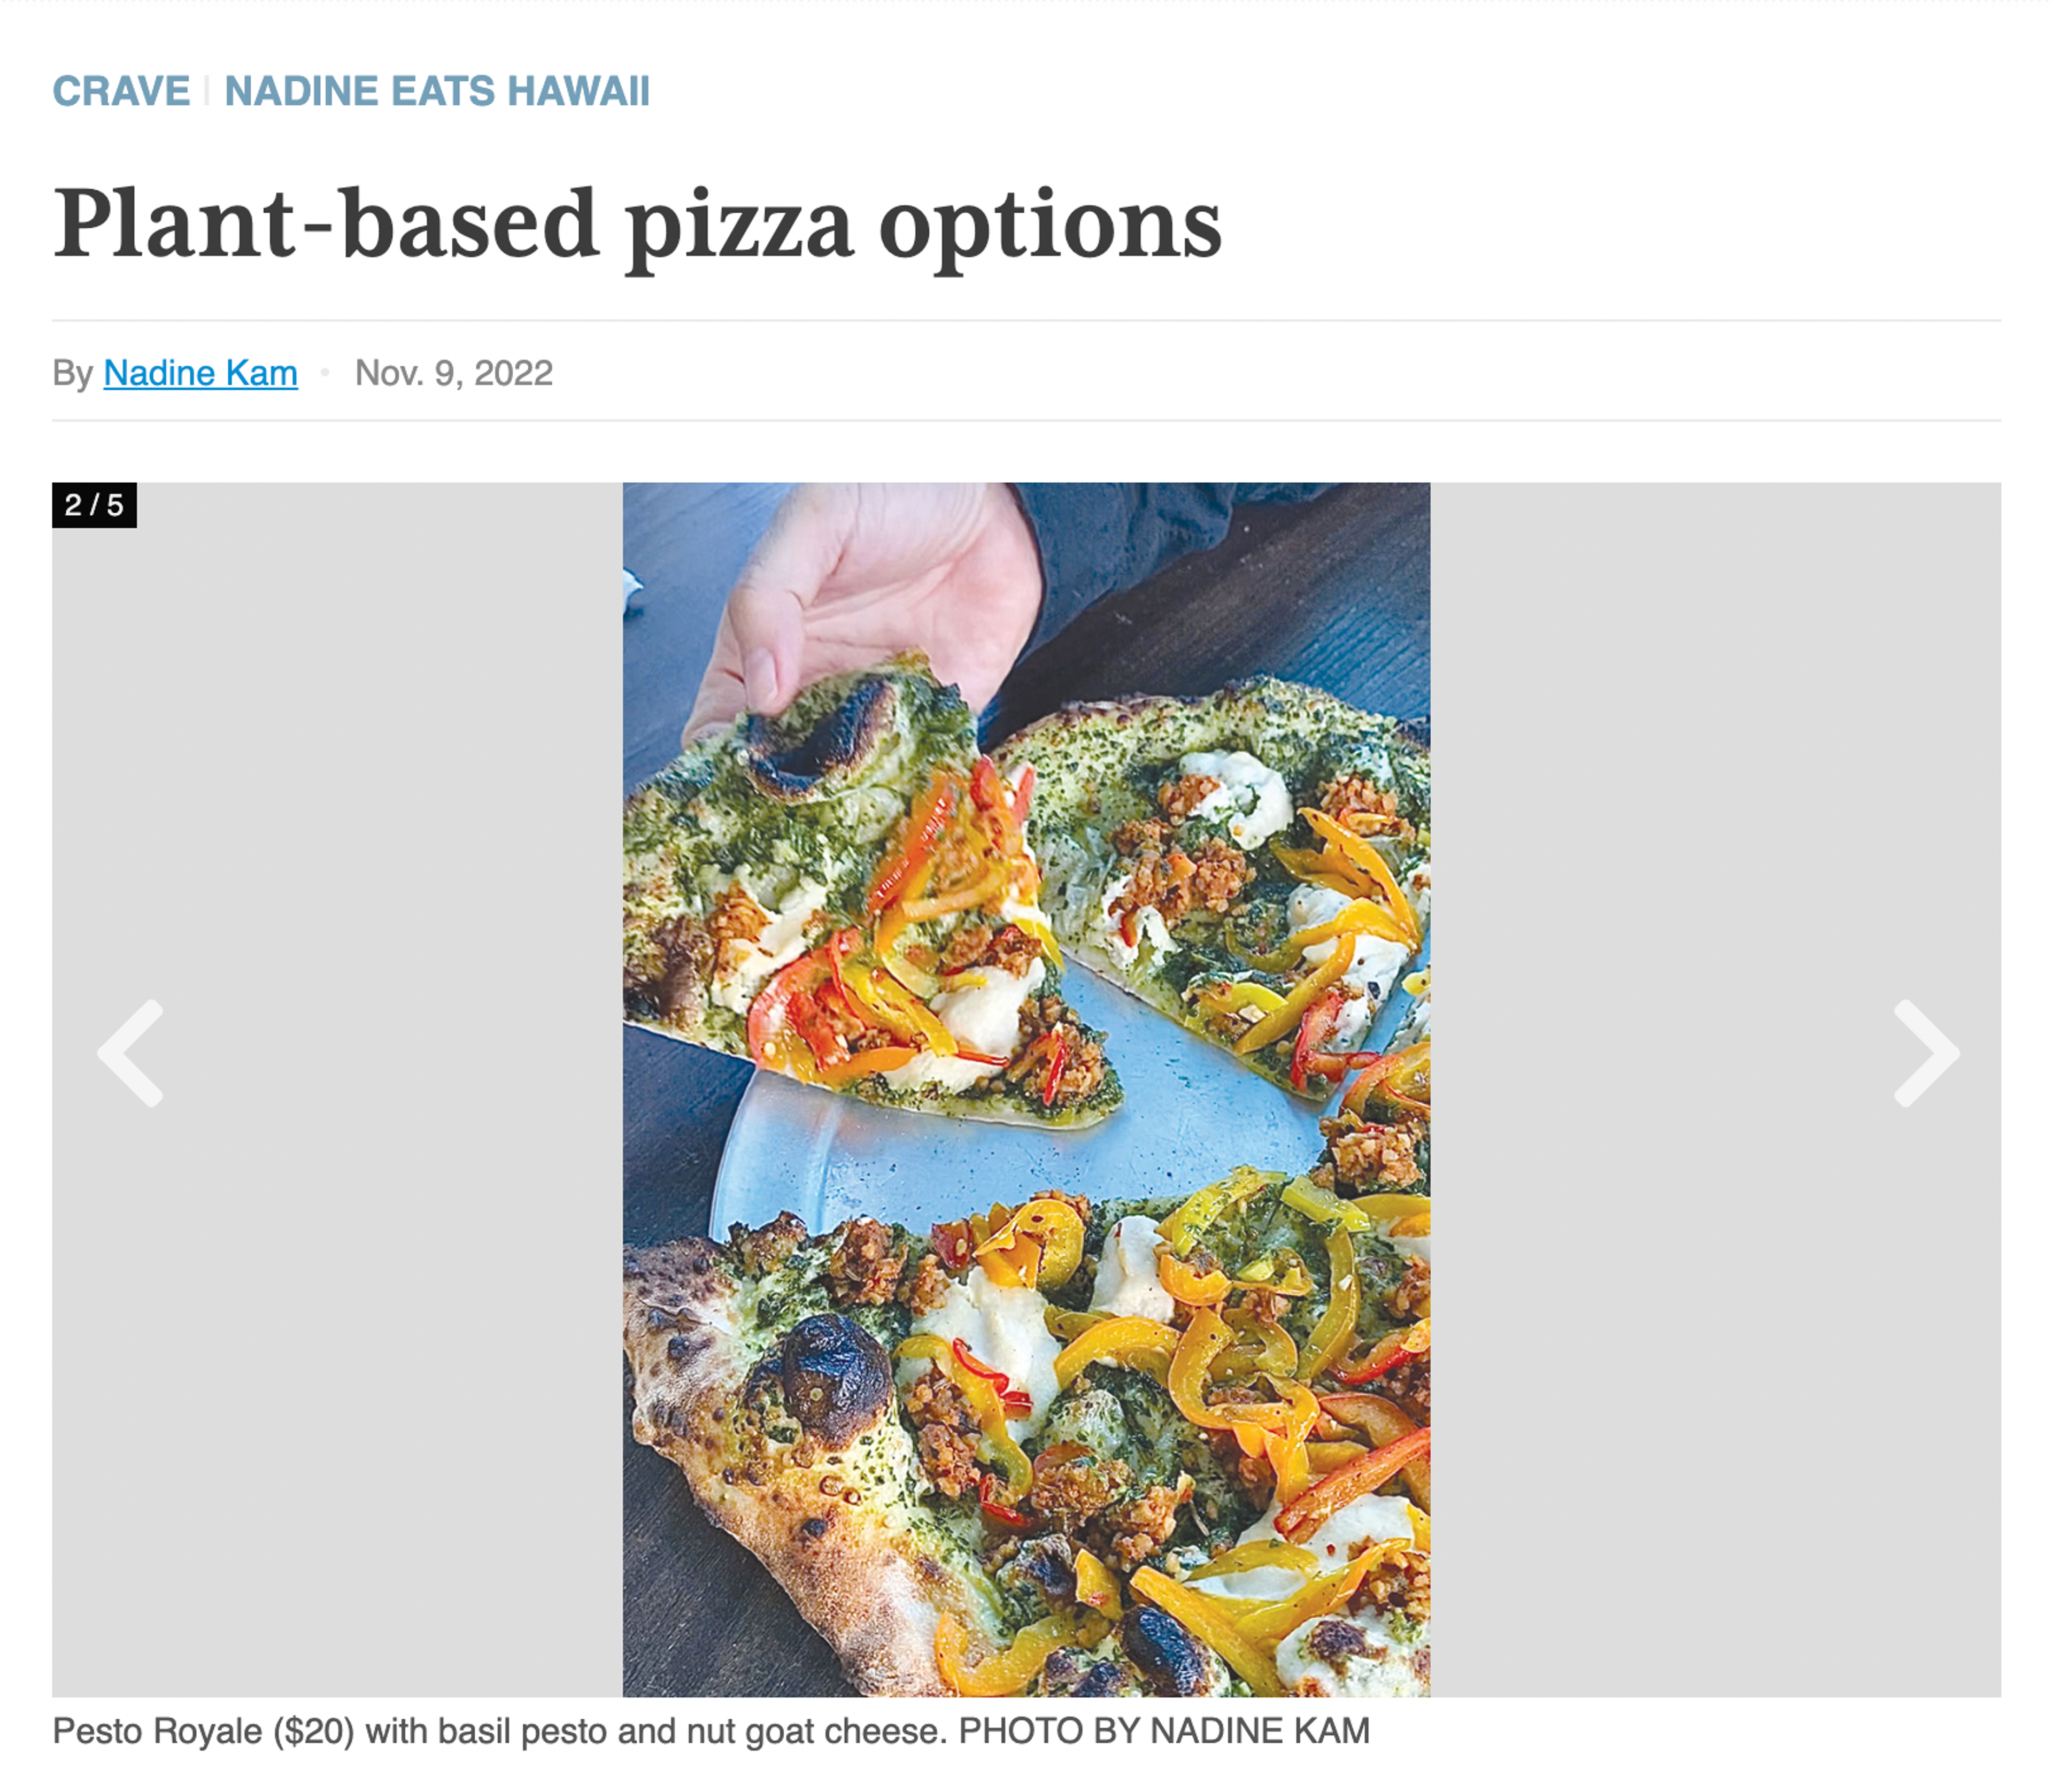 image of online article - pesto royale pizza